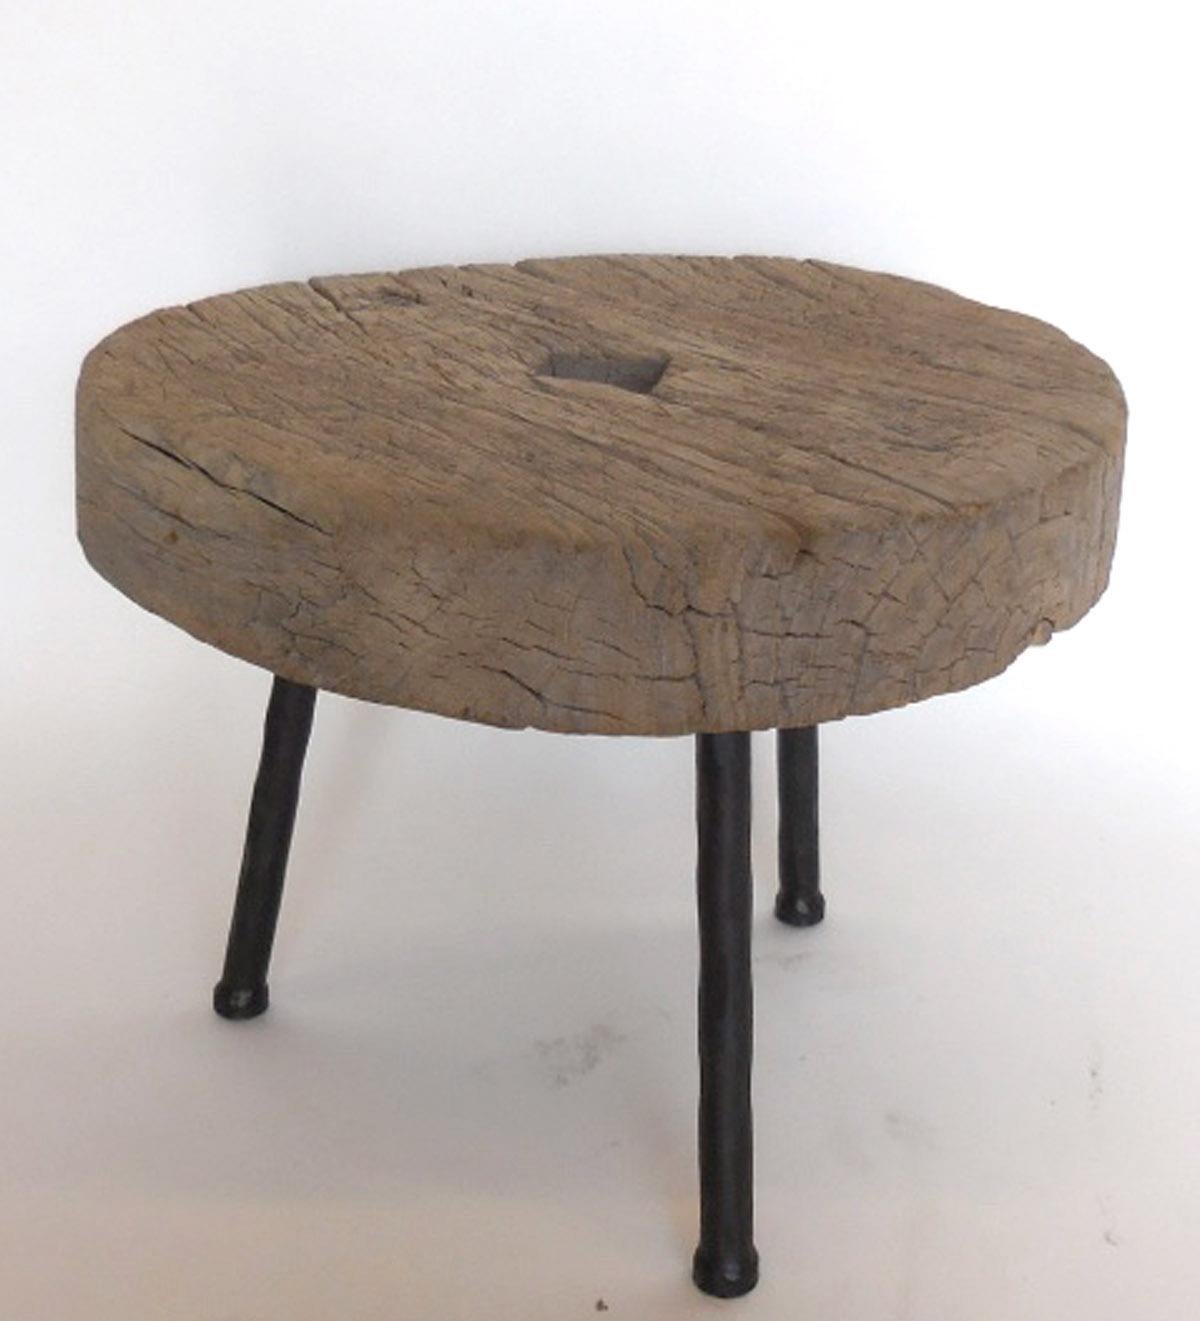 Rustic 19th century wooden elm wheel atop three contemporary hand forged iron legs. Wood shows natural patina and appropriate wear. Sturdy. Made by Dos Gallos Studio.